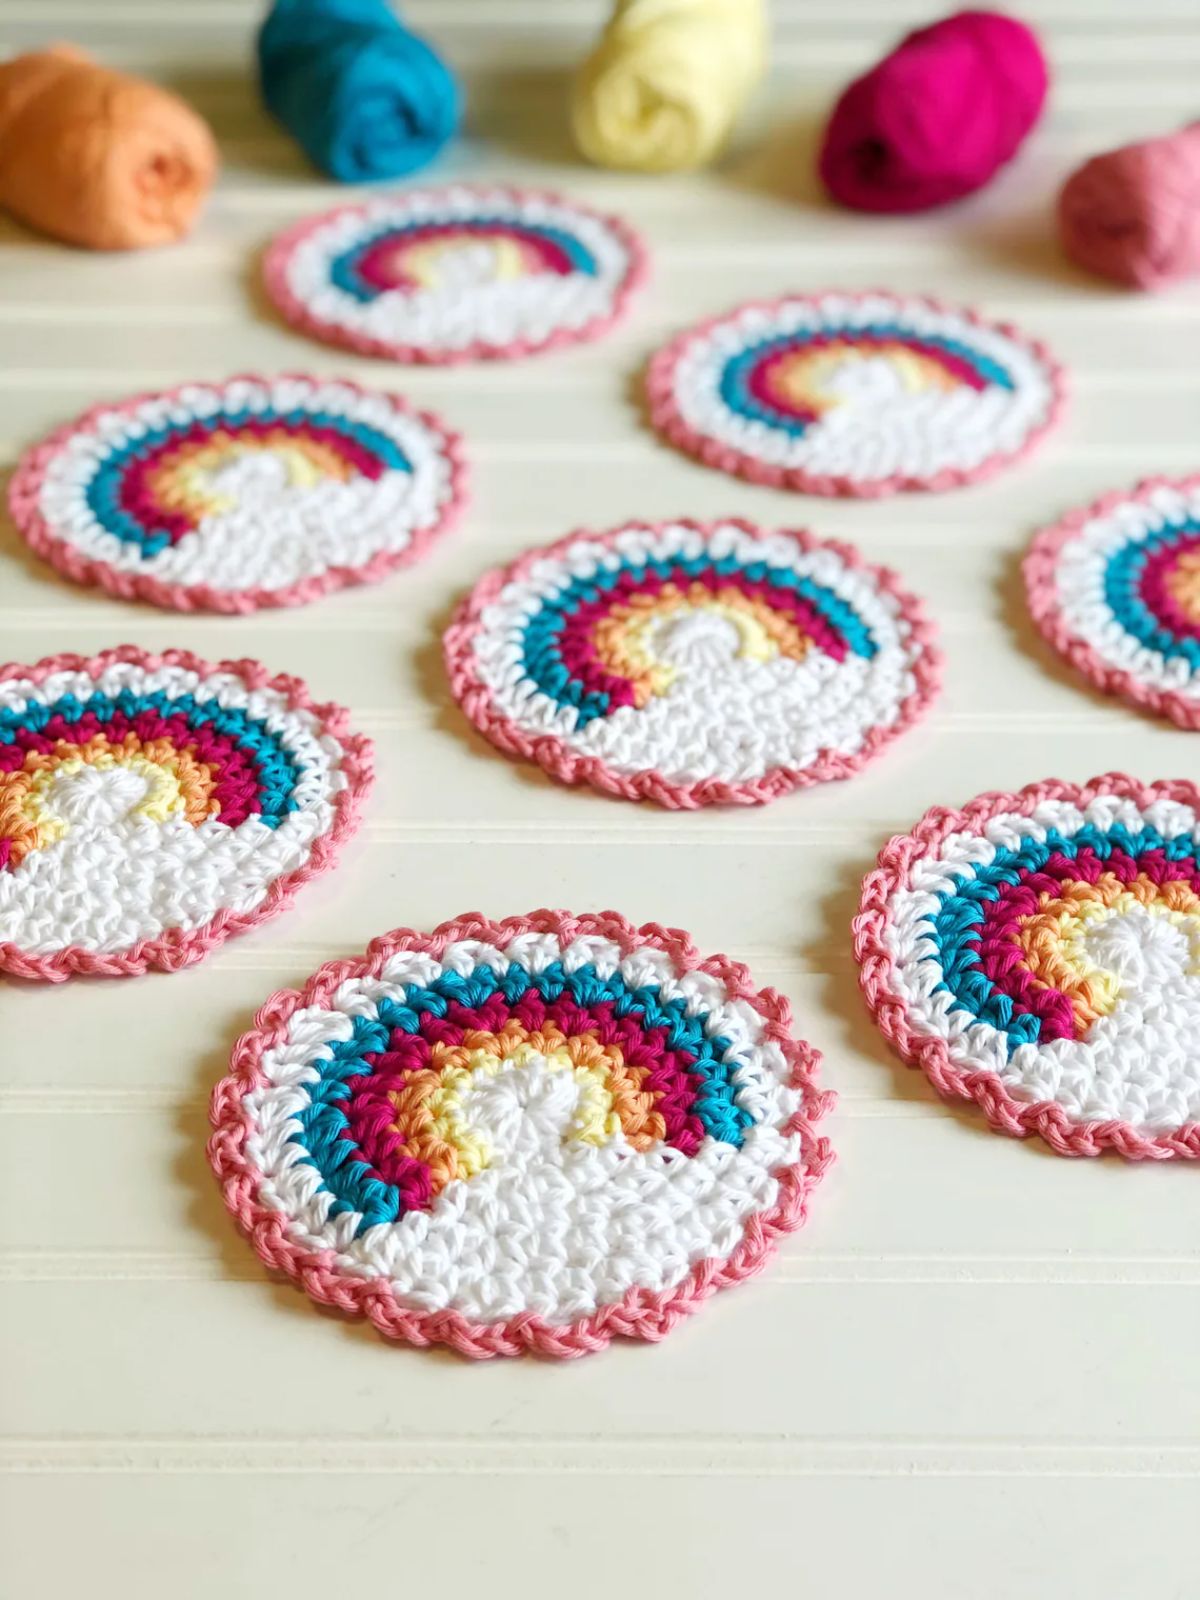 Small white crochet coasters with a pink trim and a rainbow in the top half spread out on a pale wooden table.